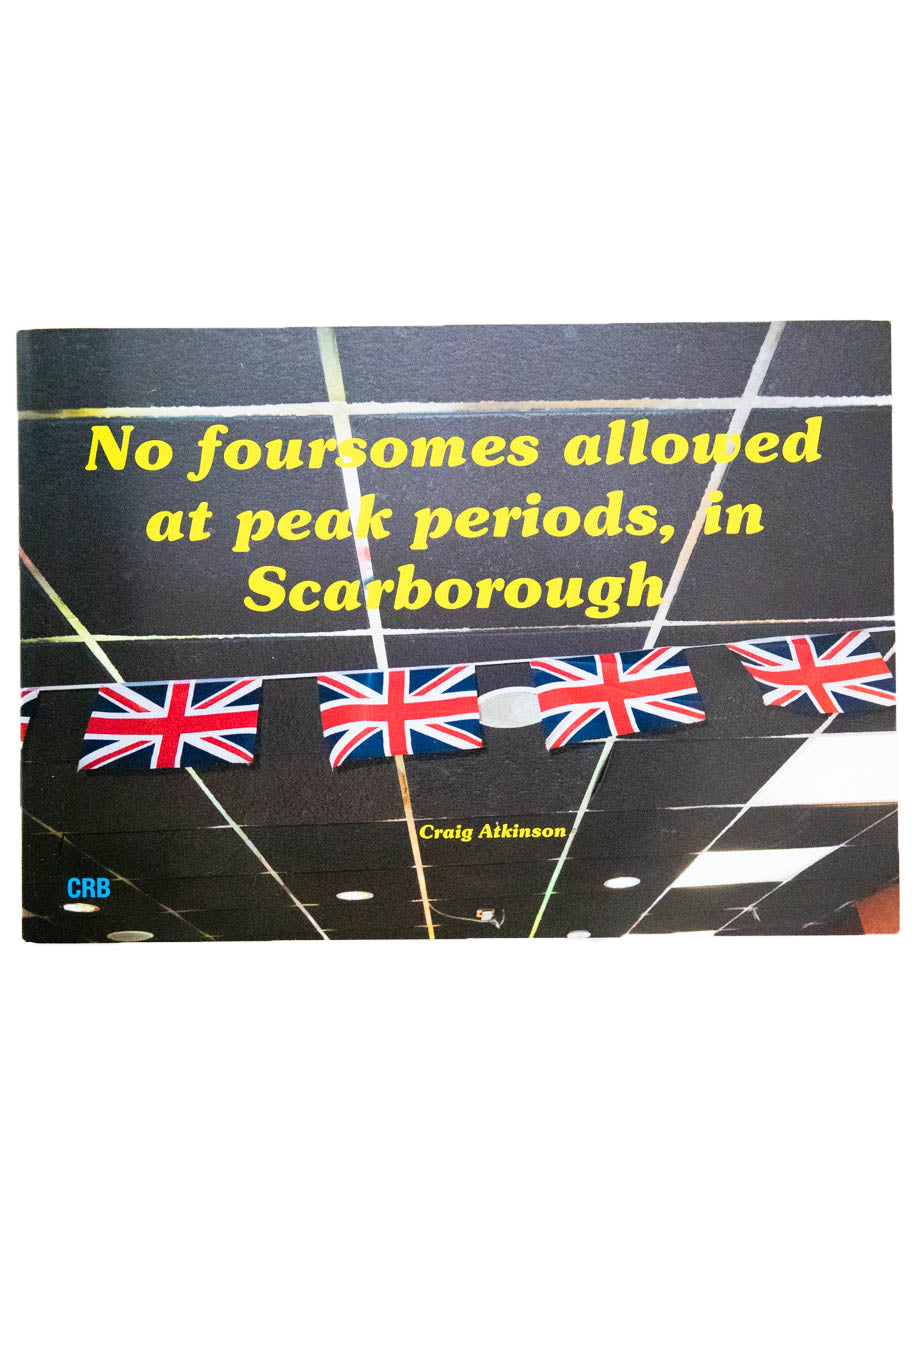 NO FOURSOMES ALLOWED AT PEAK PERIODS, IN SCARBOROUGH